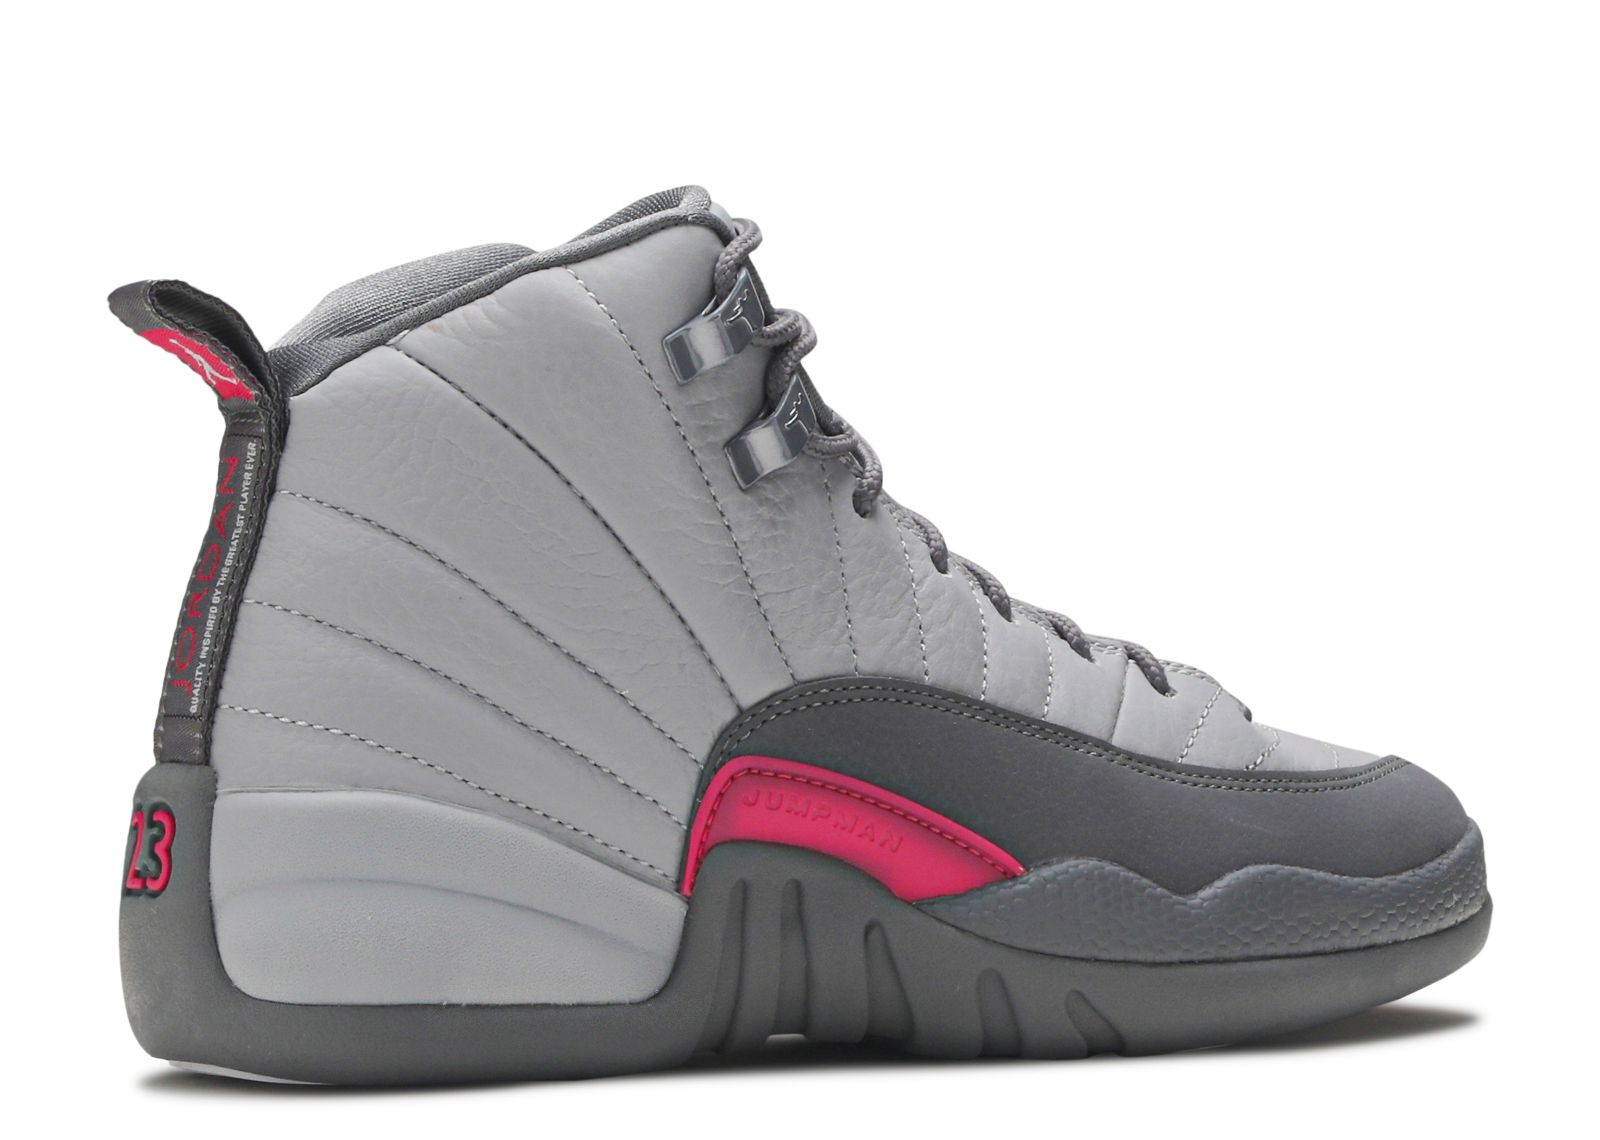 12s pink and grey